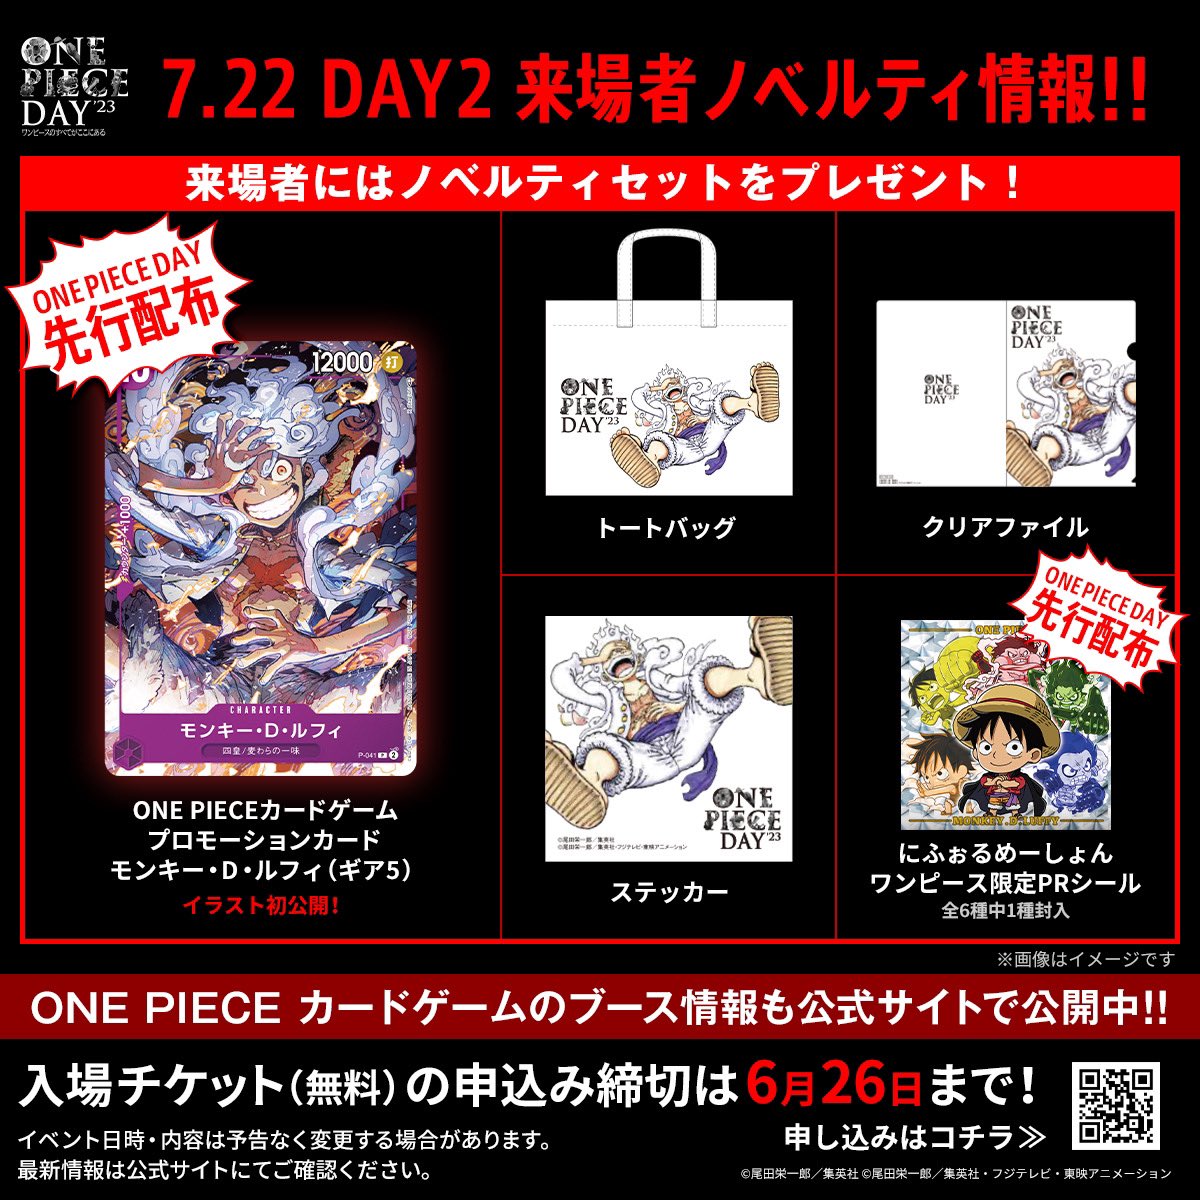 ONE PIECE DAY'23」Day2で配布予定のプロモカード「モンキー・D